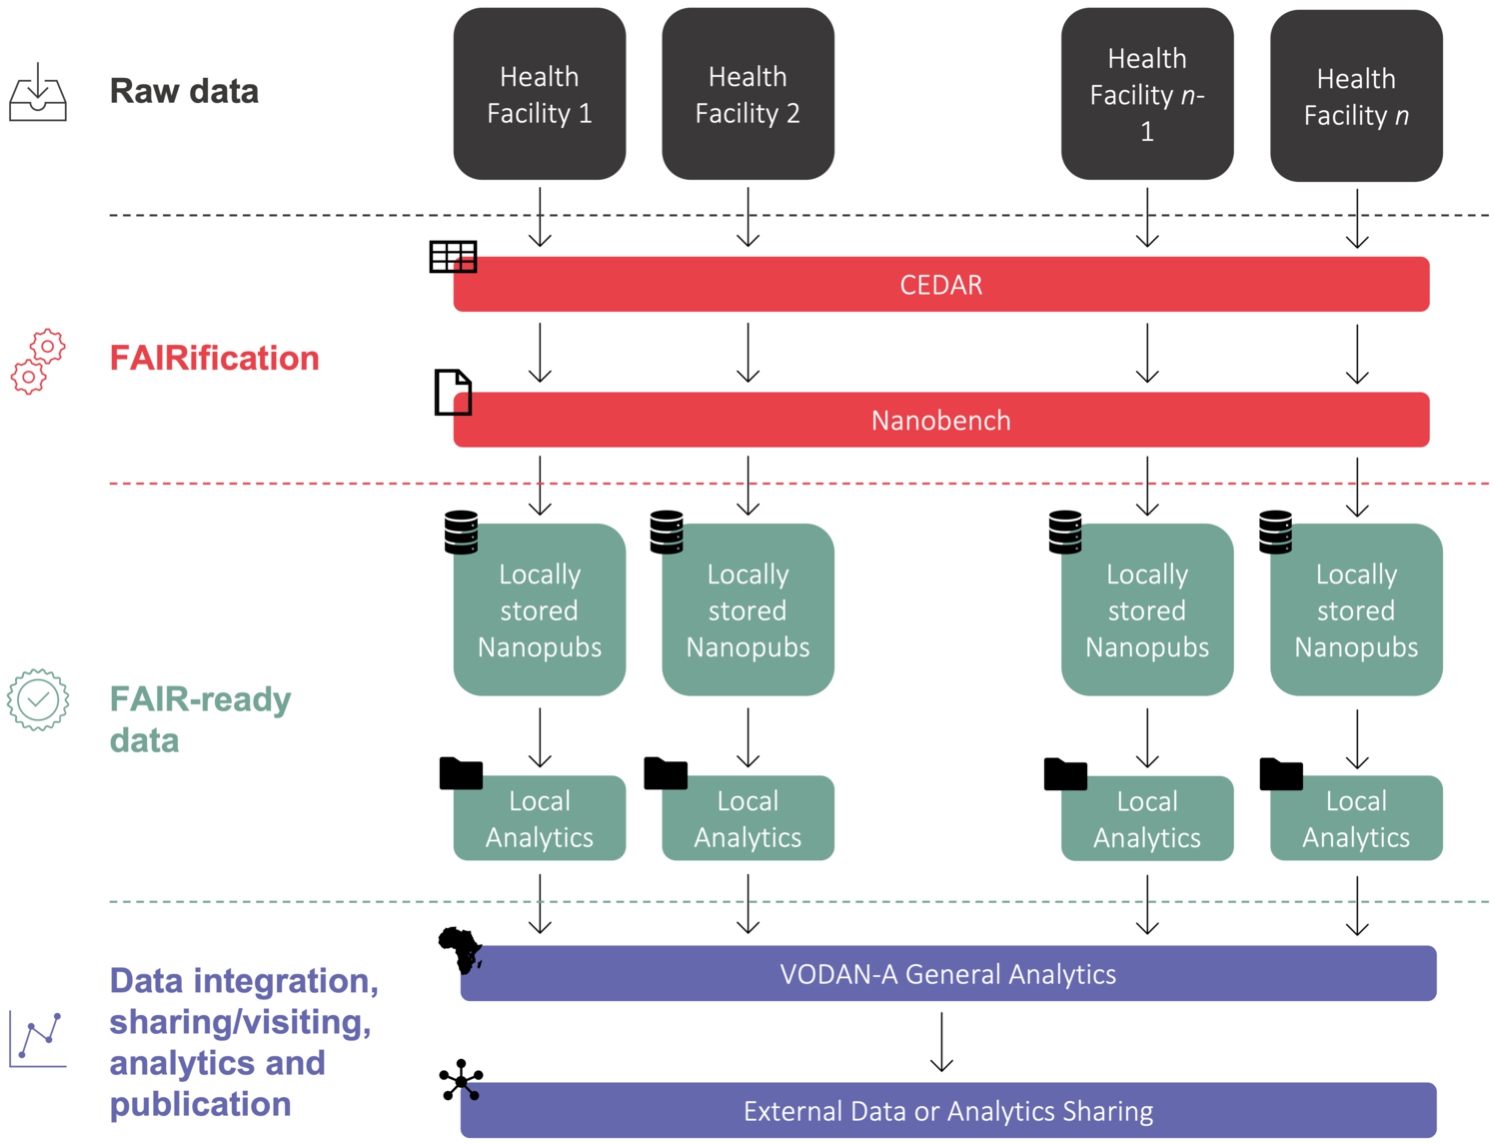 Proposed high-level structure for VODAN-A using nanopublications as a minimum unit of usable data and taking the FAIR Hourglass Model into account. Here we can see showcased the journey starting in the top of the hourglass with raw data and FAIRification process, the center with FAIR-ready data in the form of nanopublications and the last part of data integration/sharing/visiting analytics and publication, corresponding to the bottom of the hourglass.